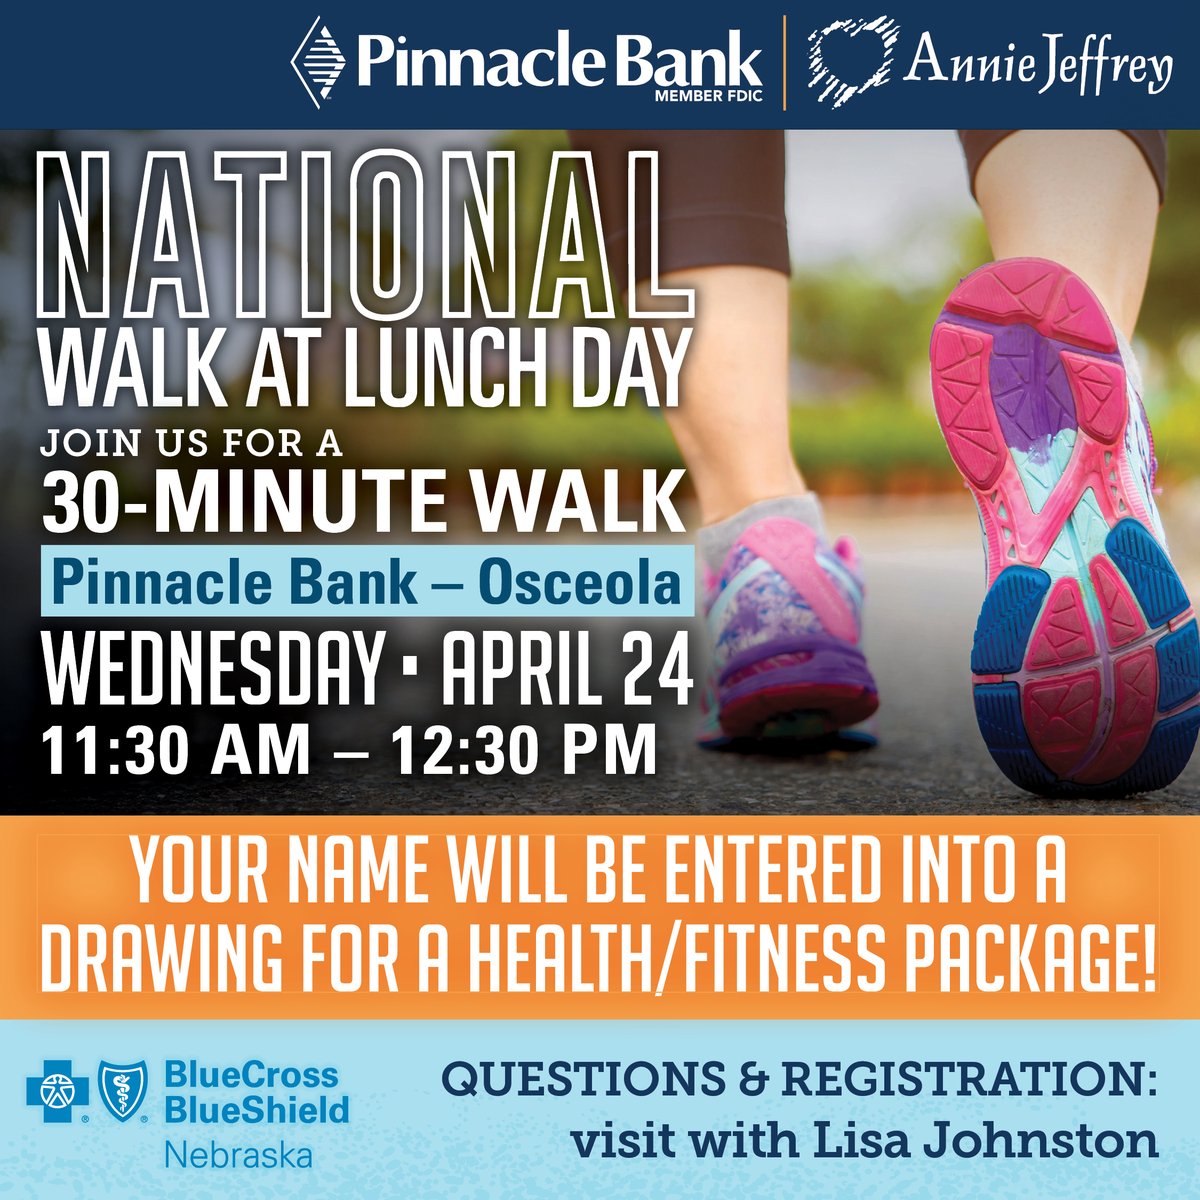 👟 Join us on National Walk at Lunch Day at our branch in Osceola, April 24, 11:30-12:30 for a 30-min walk. It's your chance not only to boost your wellness but also to win a great health/fitness package! Let's stride towards better health together! #WalkAtLunch #PinnacleBank